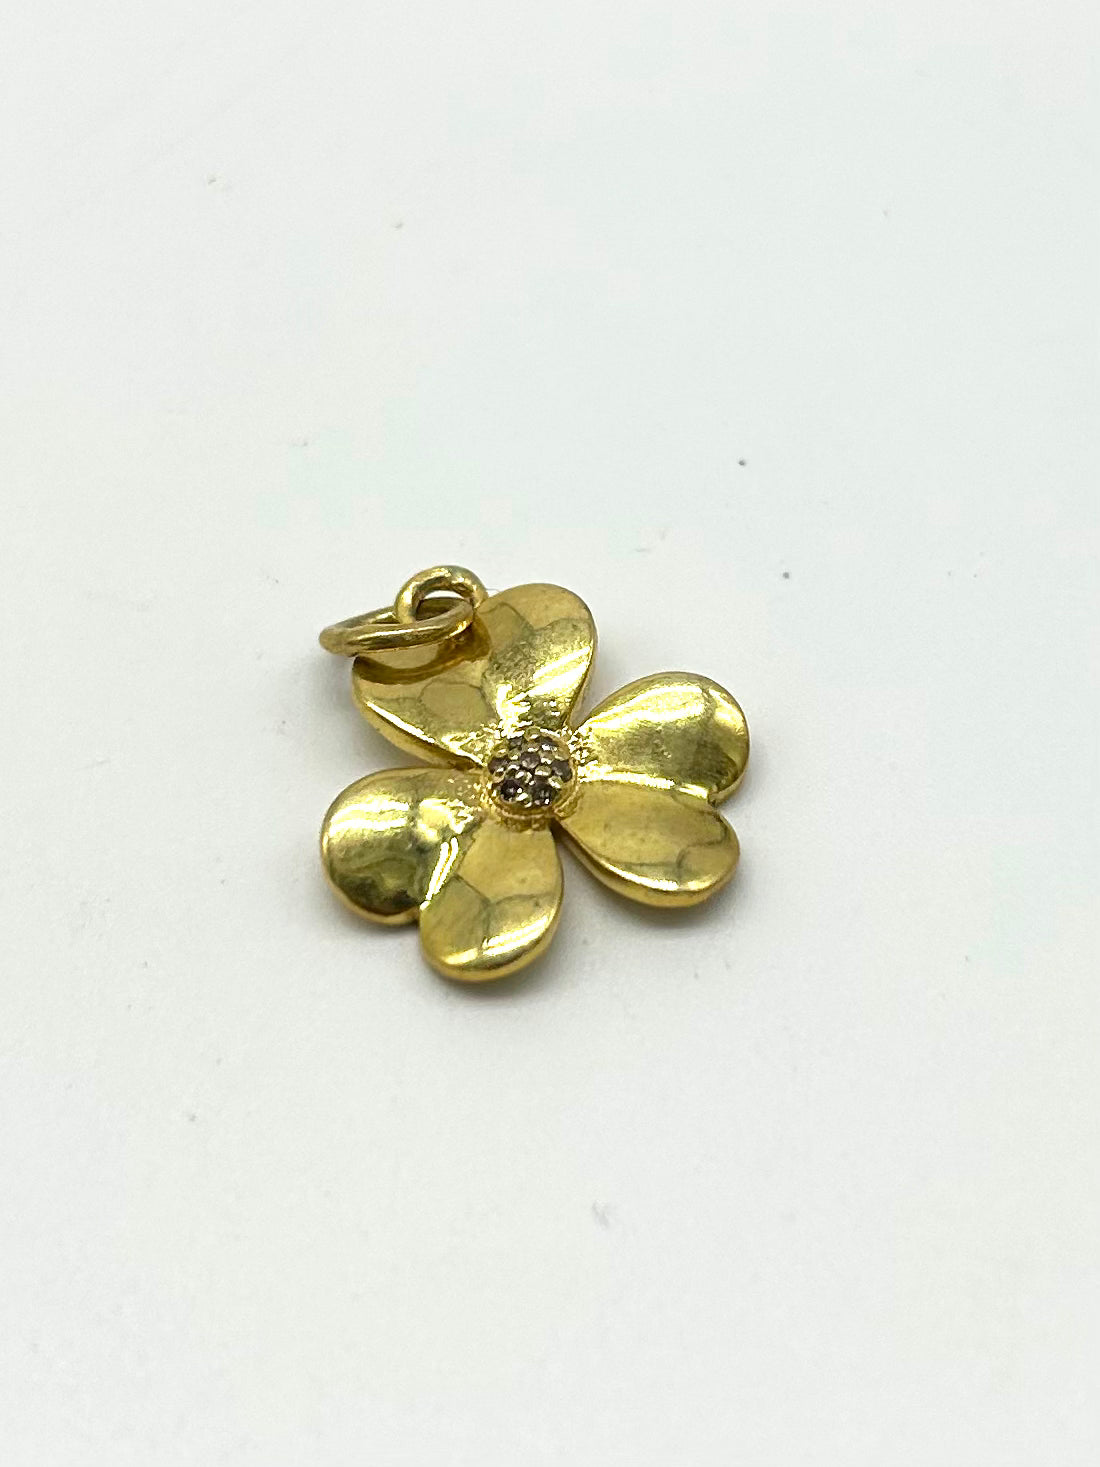 Gold clover charms with diamonds